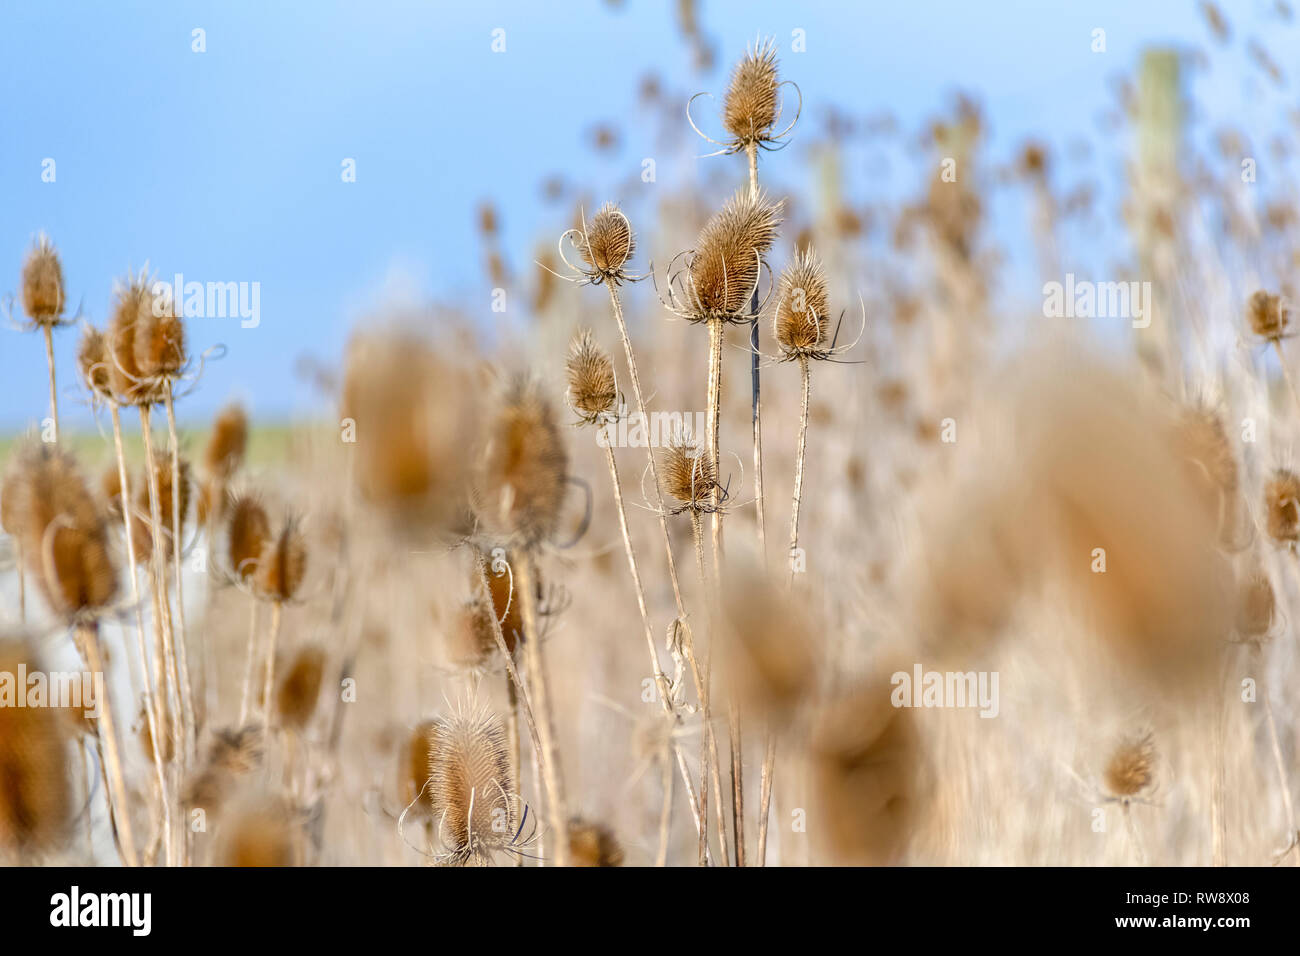 sere teasel plants at autumn time Stock Photo